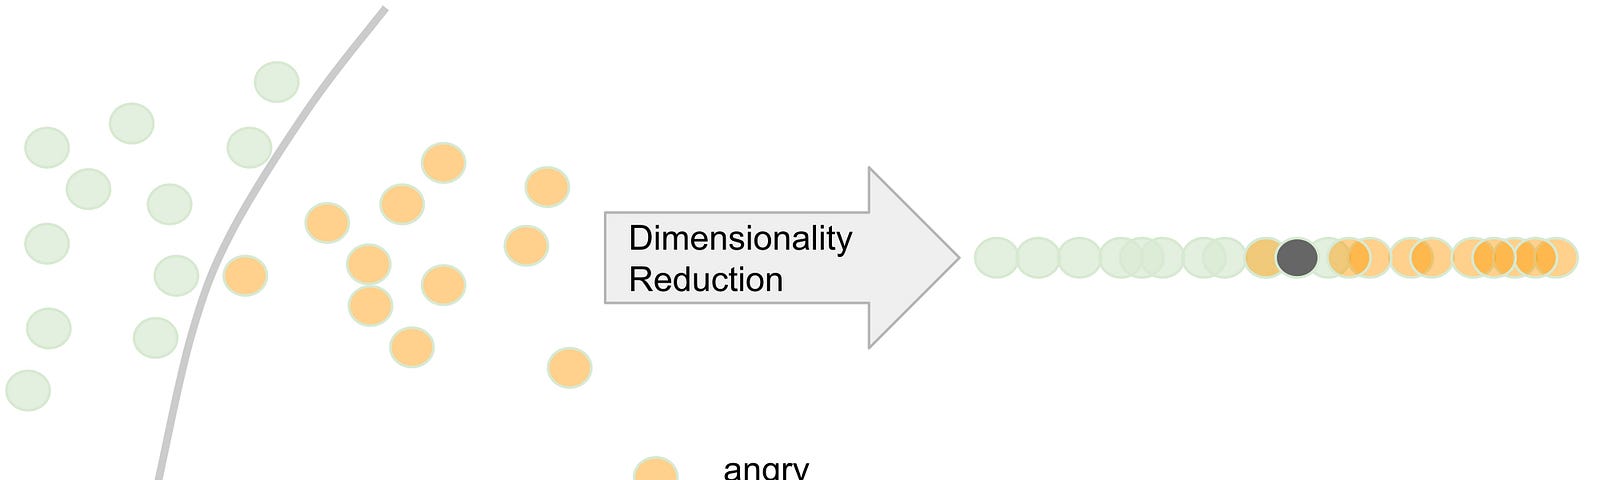 Simplified dimensionality reduction example (from 2D to 1D)